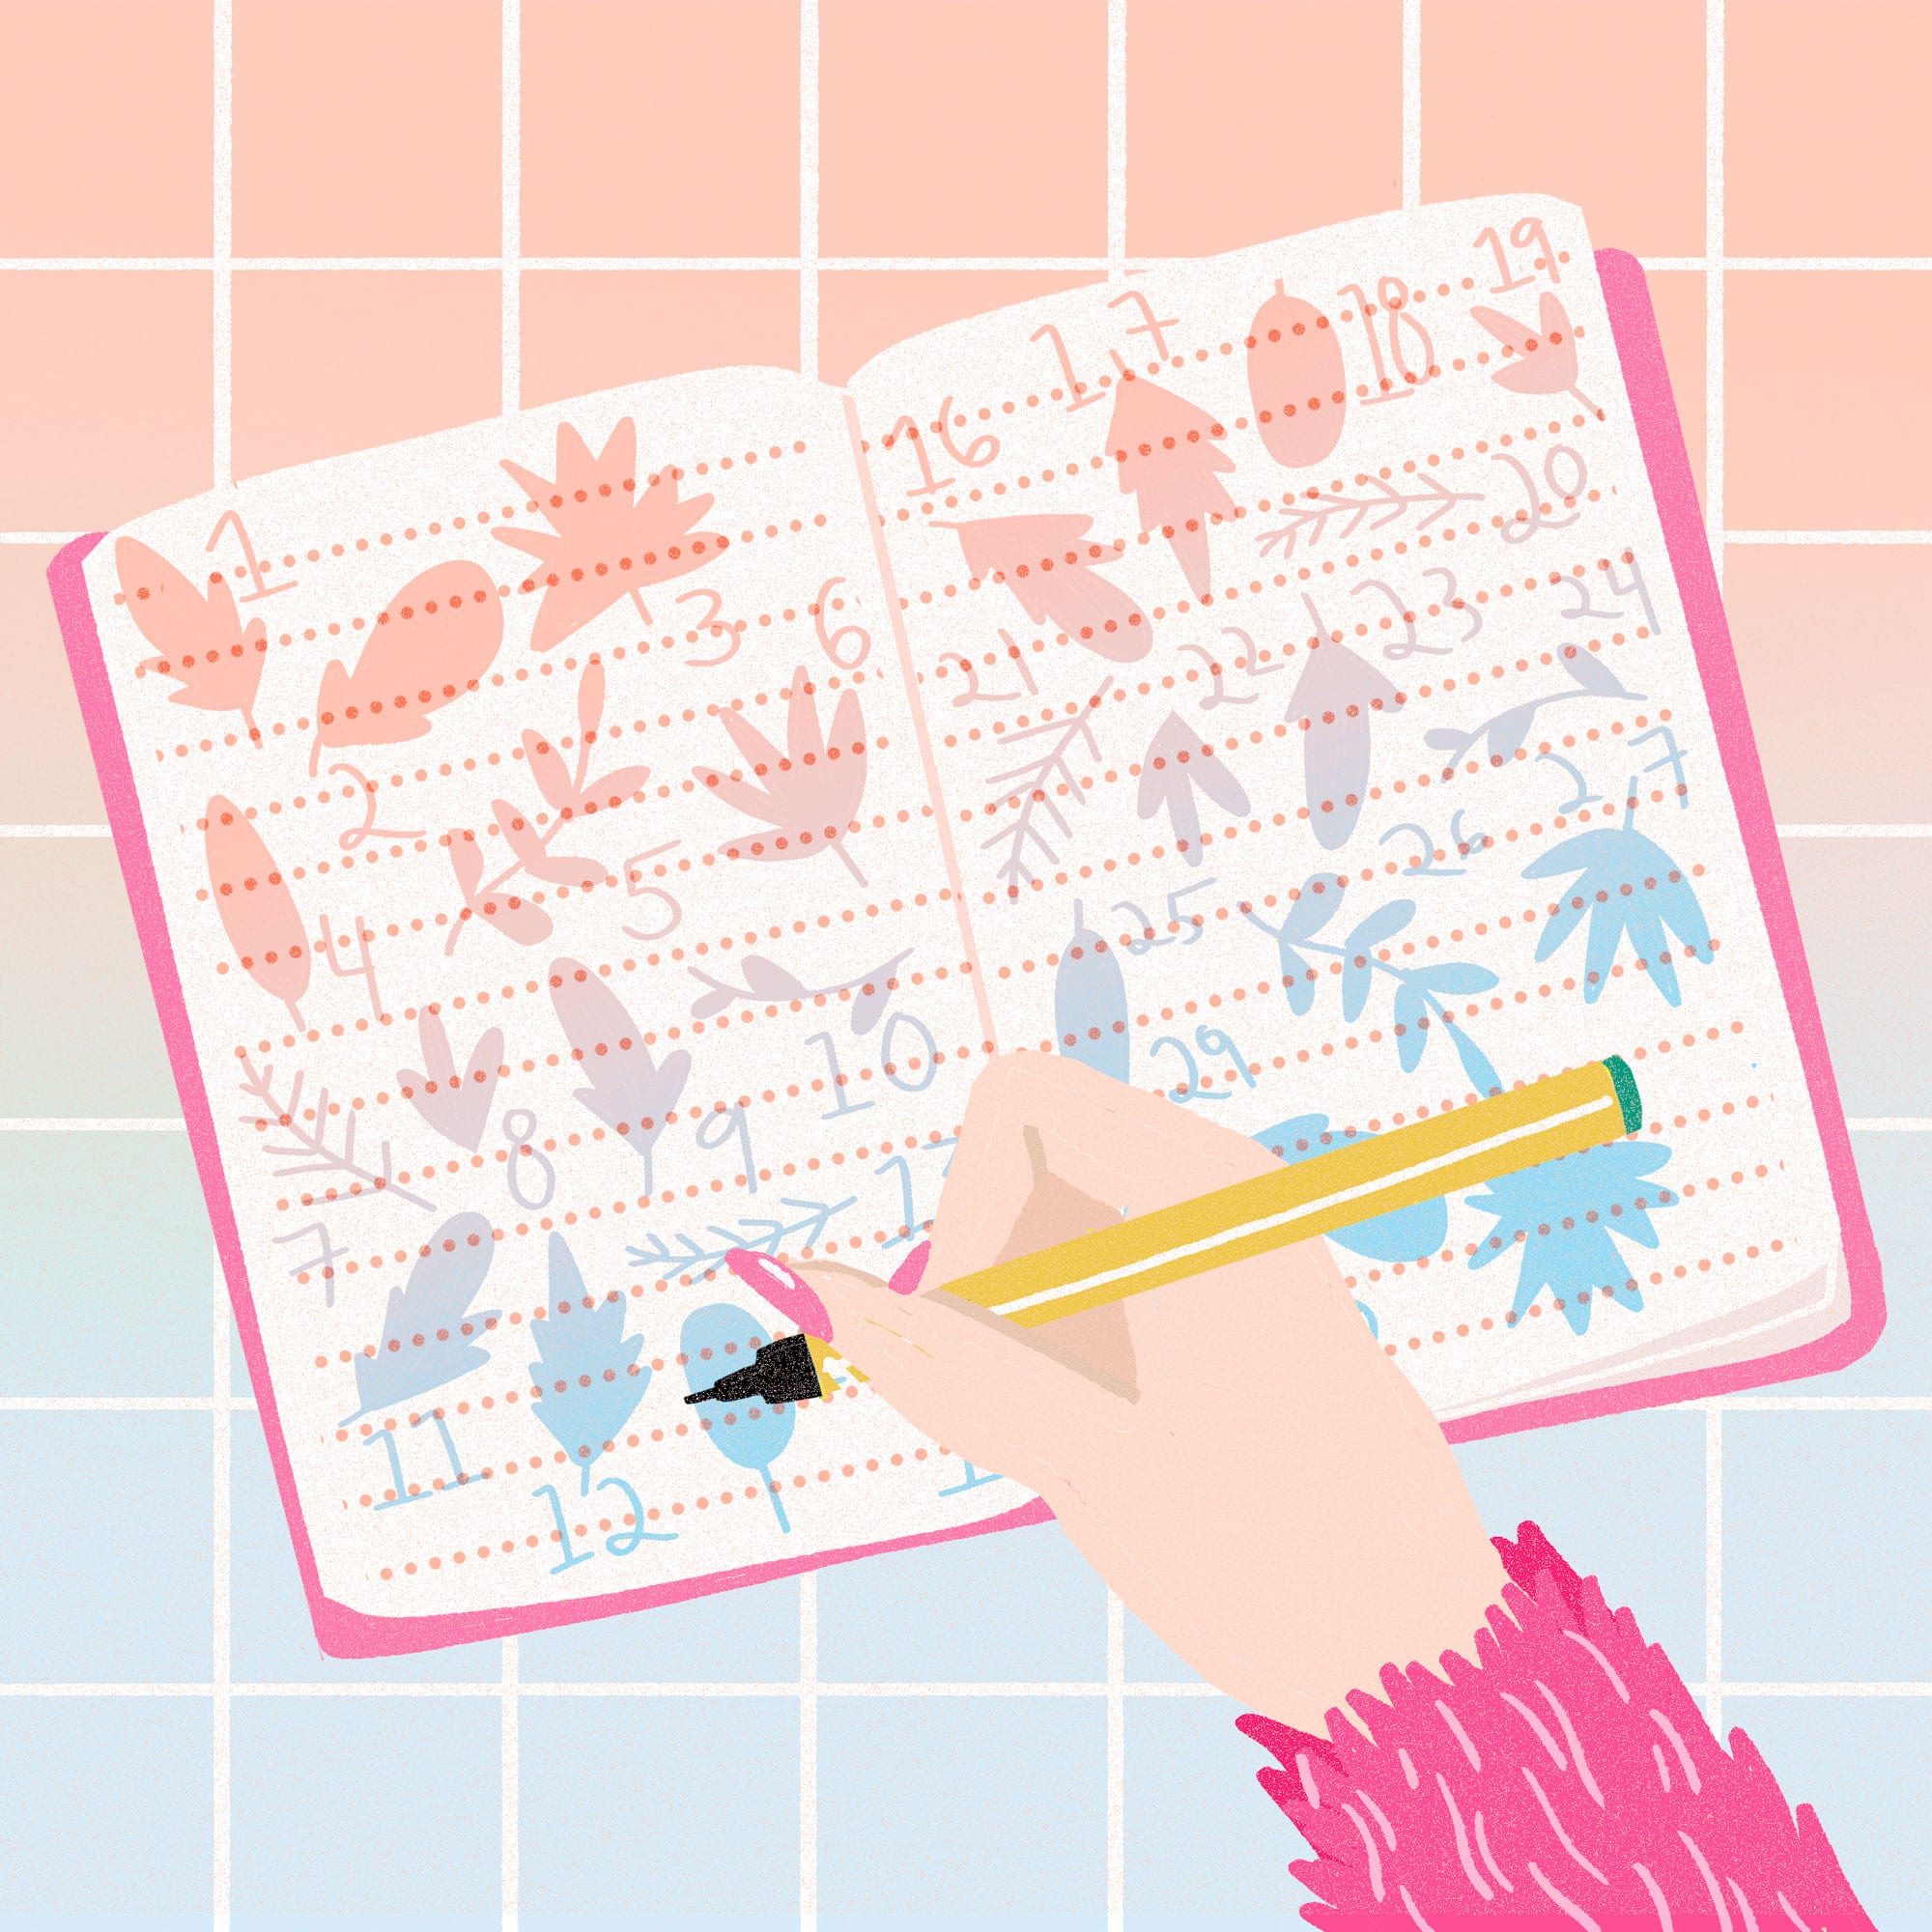 Why Bullet Journaling is a toxic trend